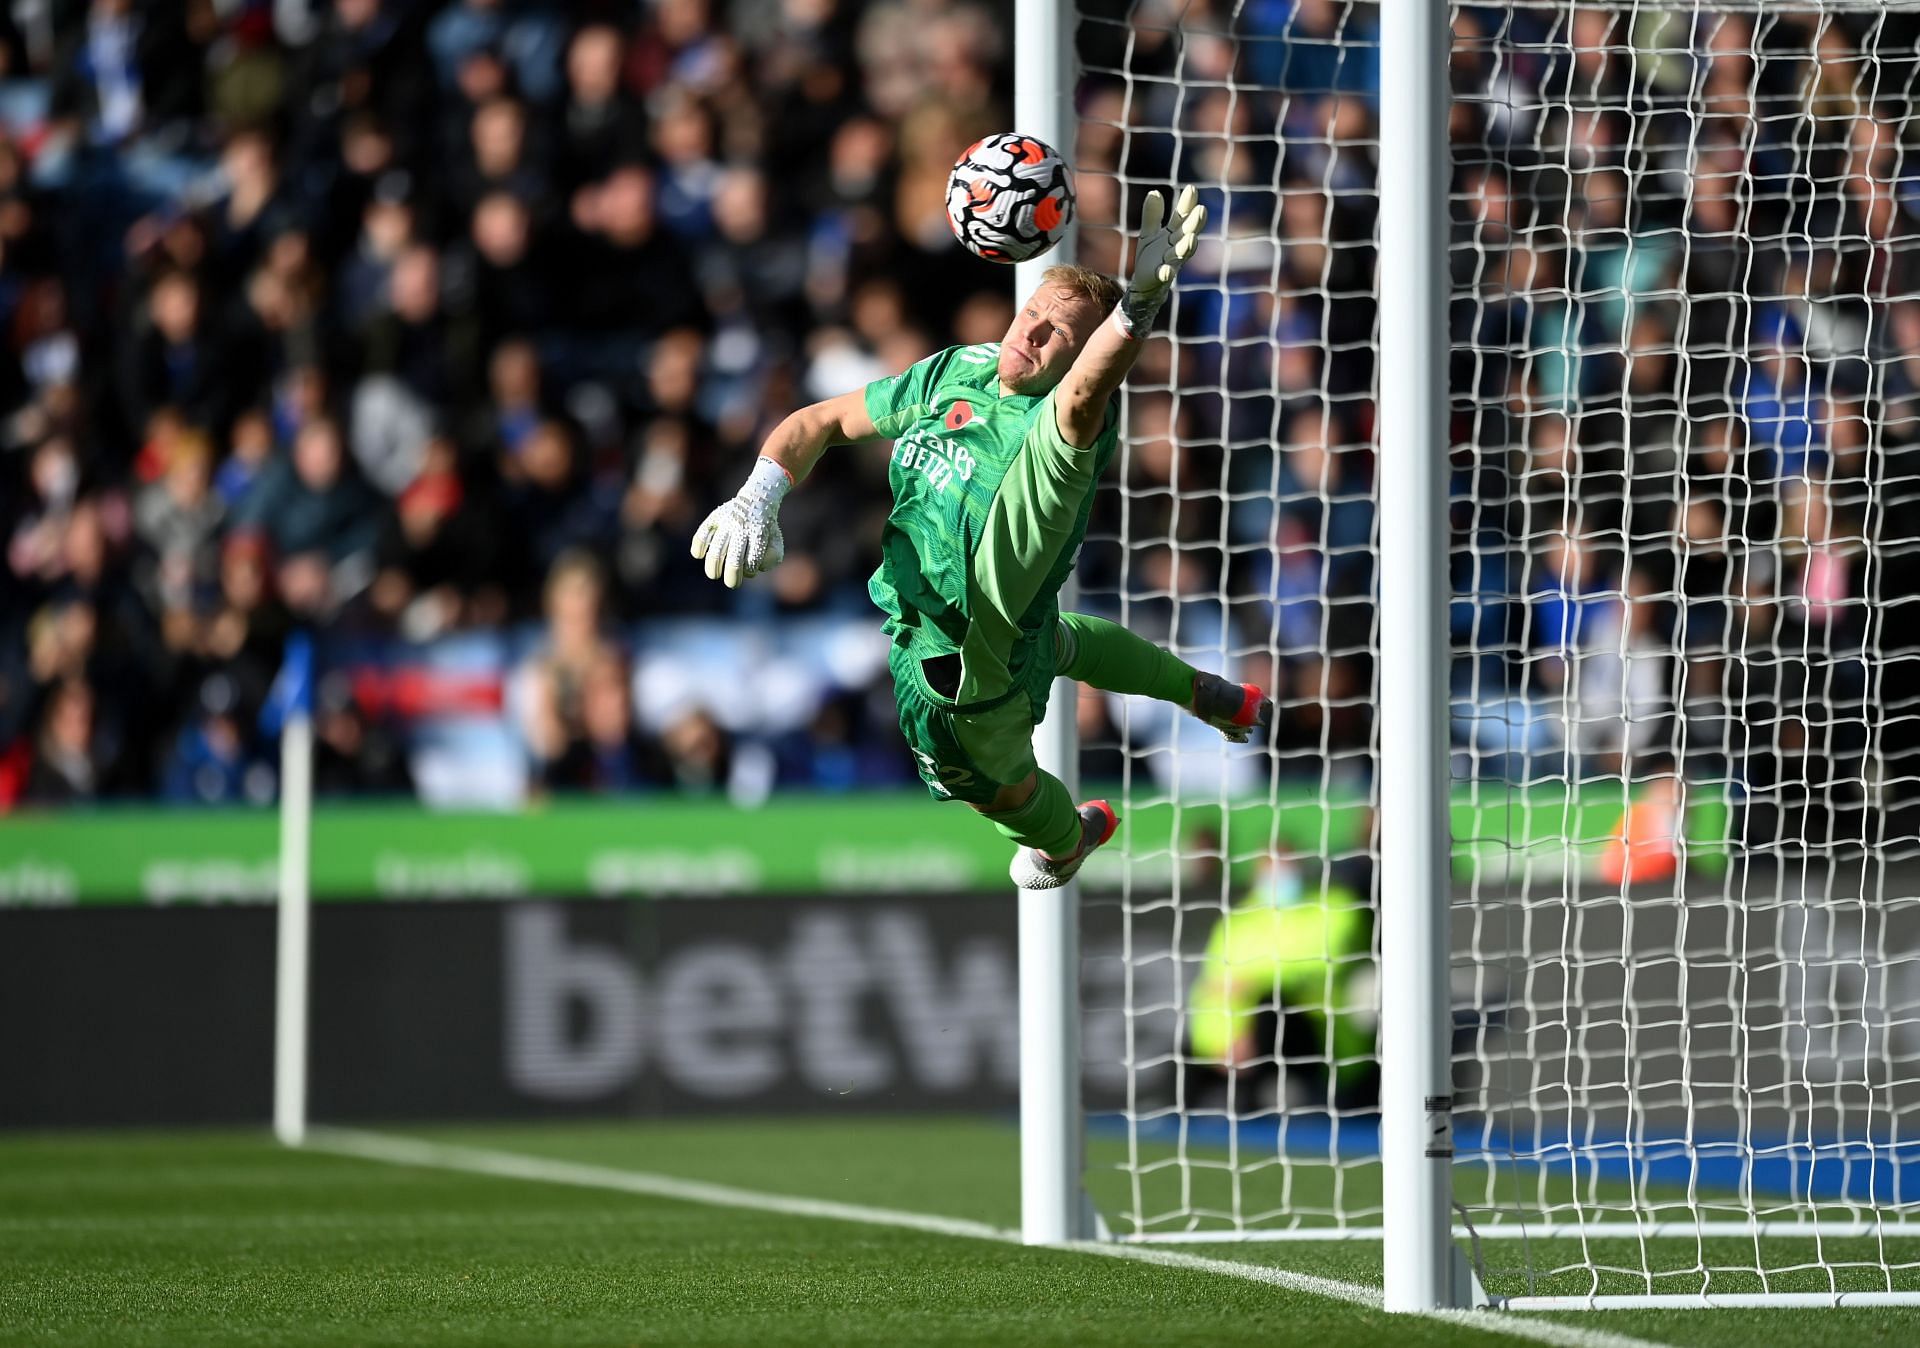 Aaron Ramsdale with a jaw-dropping save to deny James Maddison during Leicester City v Arsenal - Premier League